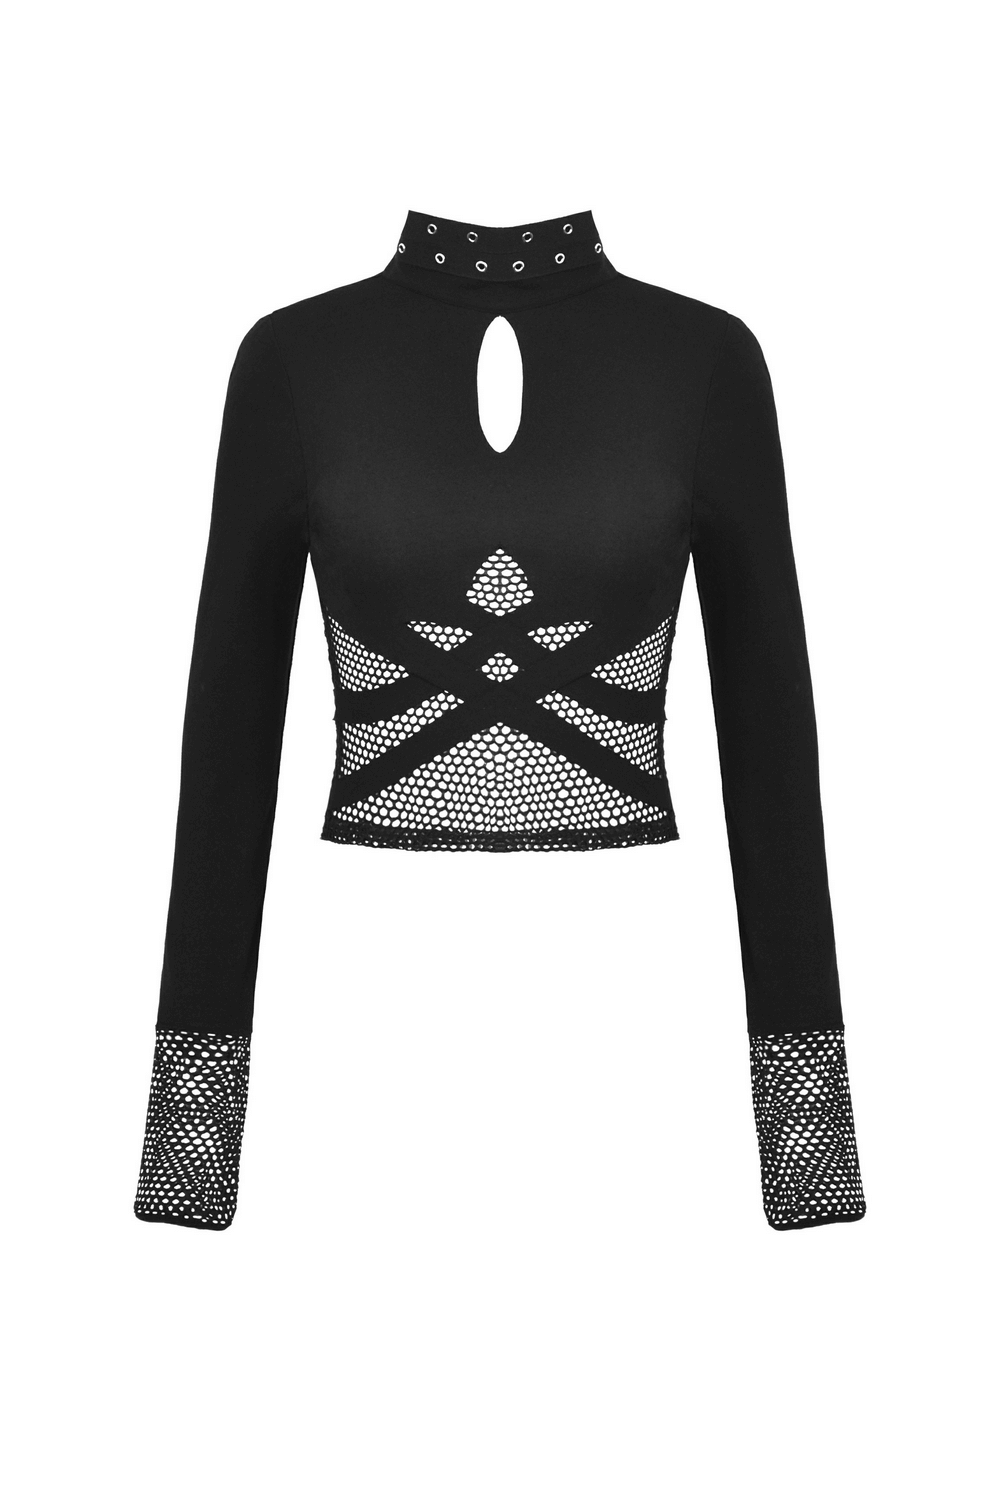 Stylish Black Crop Top with Edgy Cut-Outs and Studs